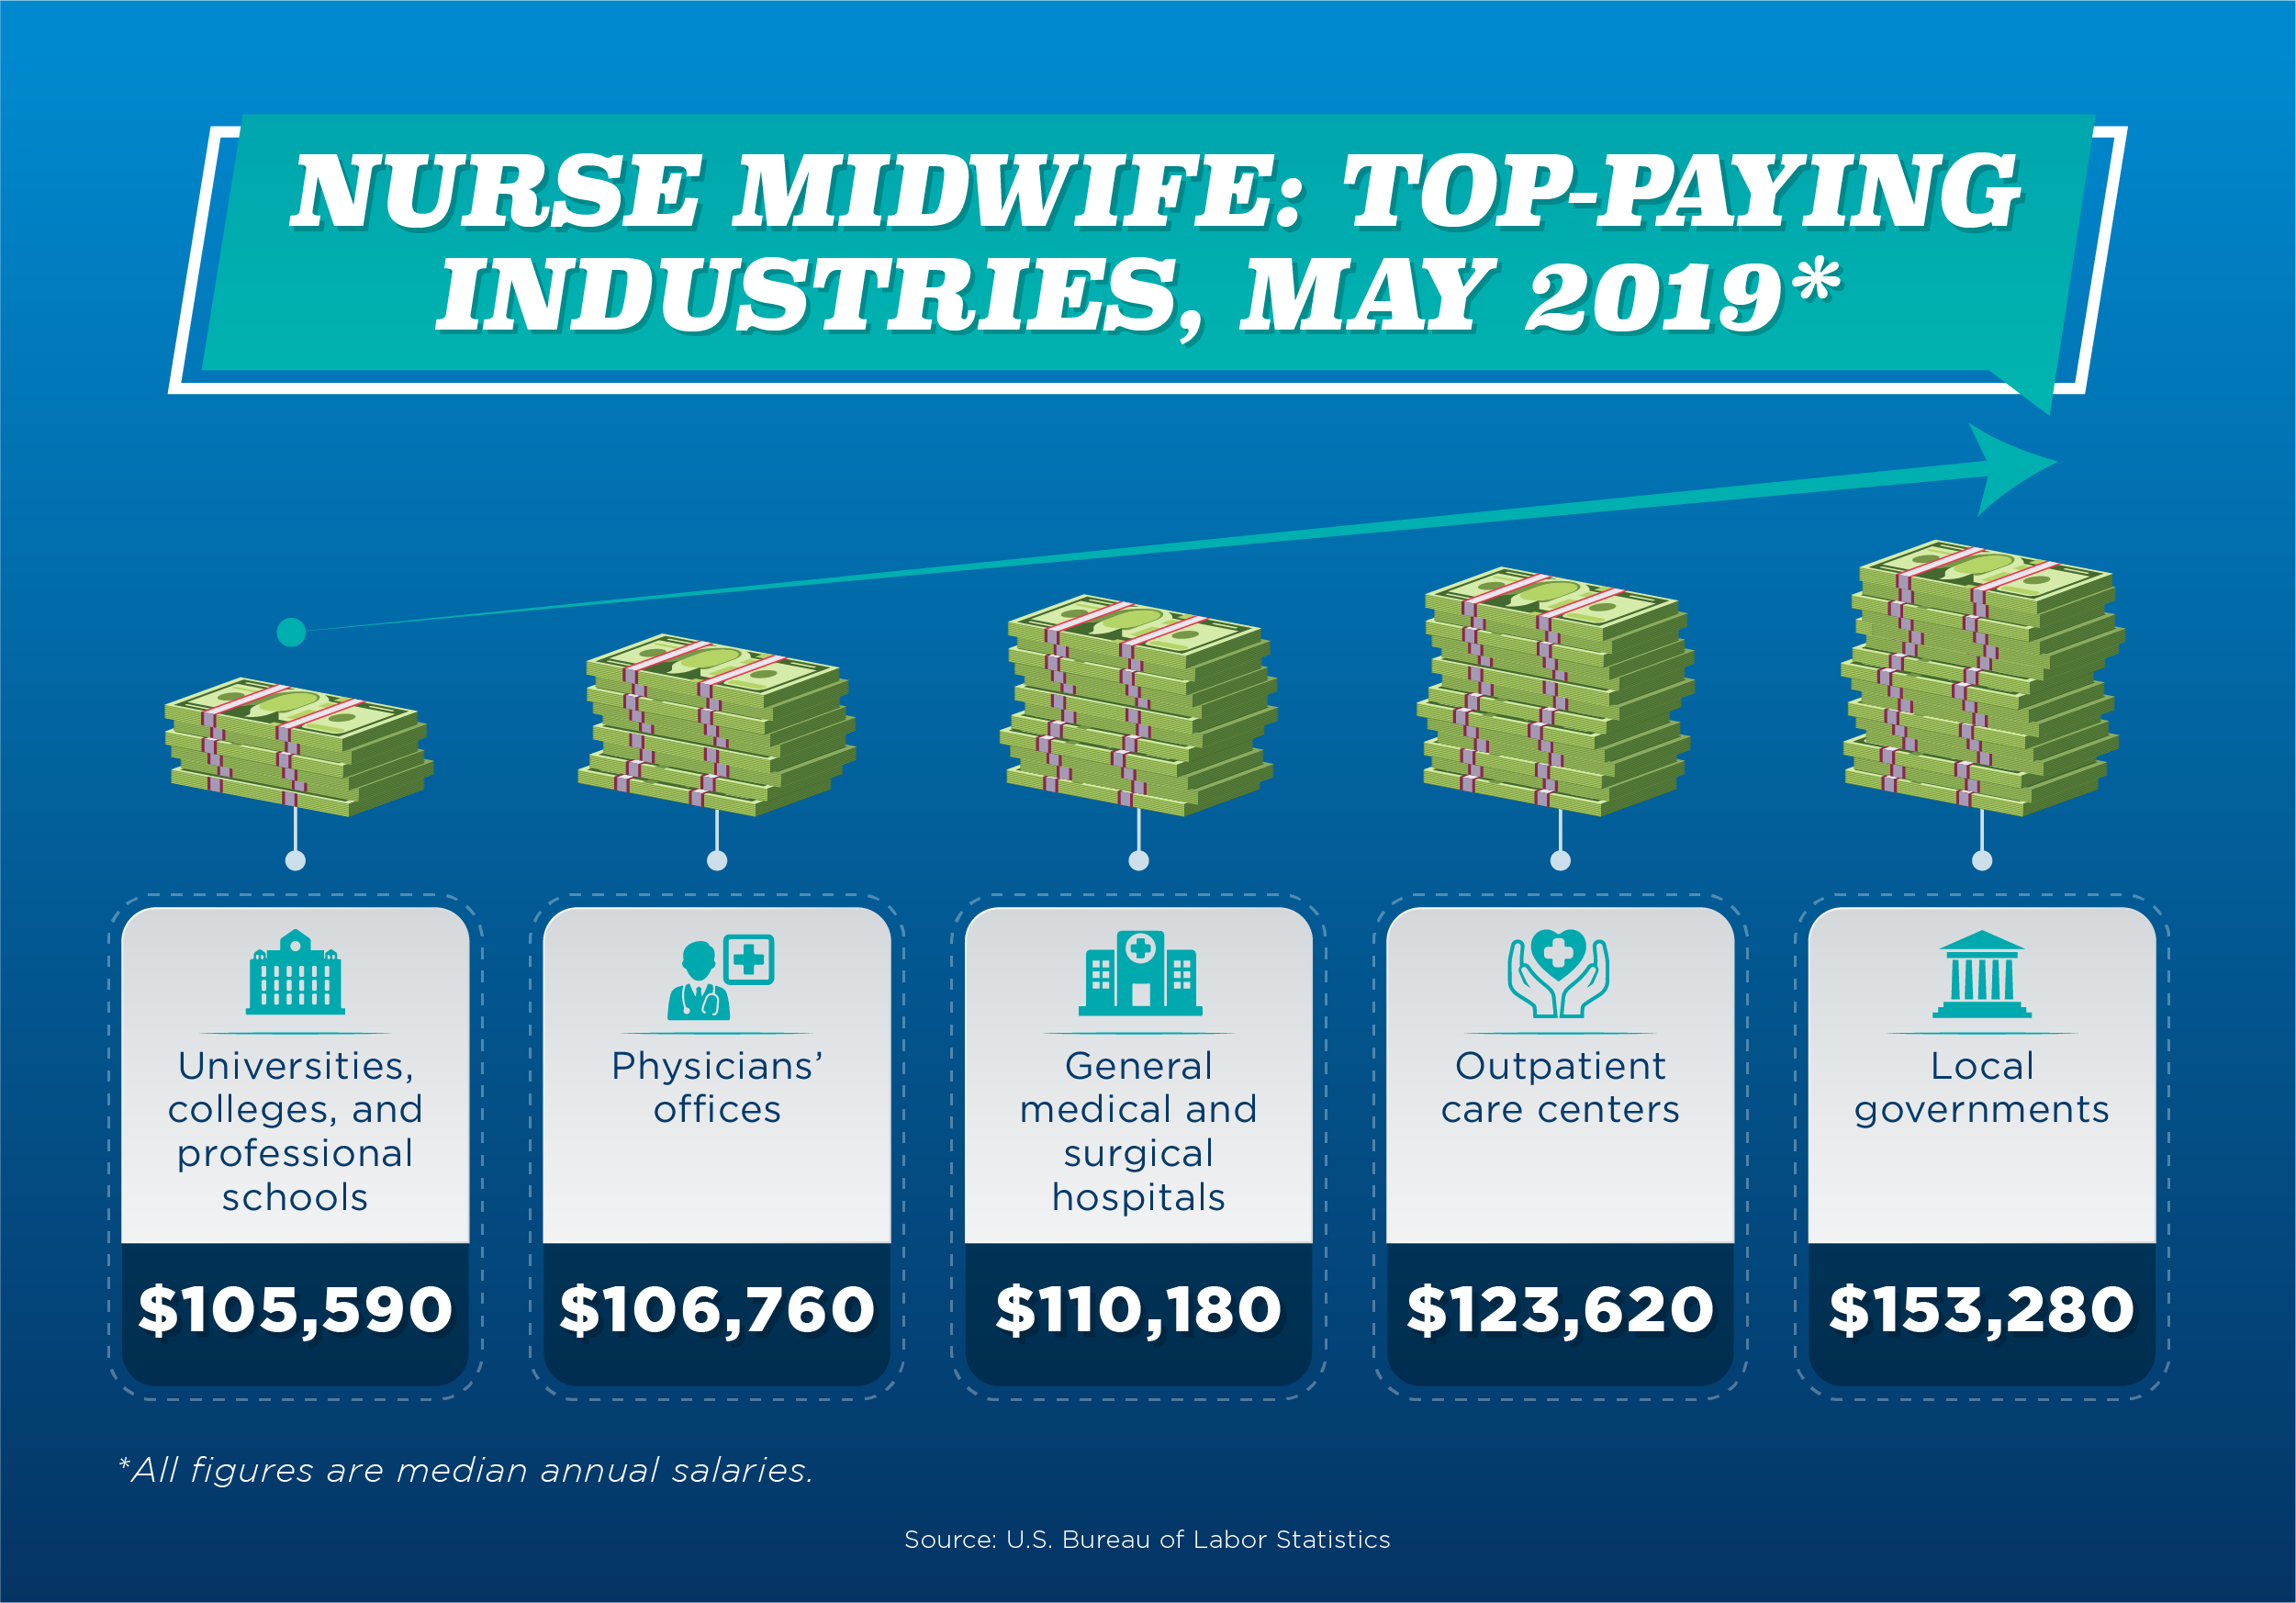 A list of the five top-paying industries that employ nurse midwives as of May 2019.